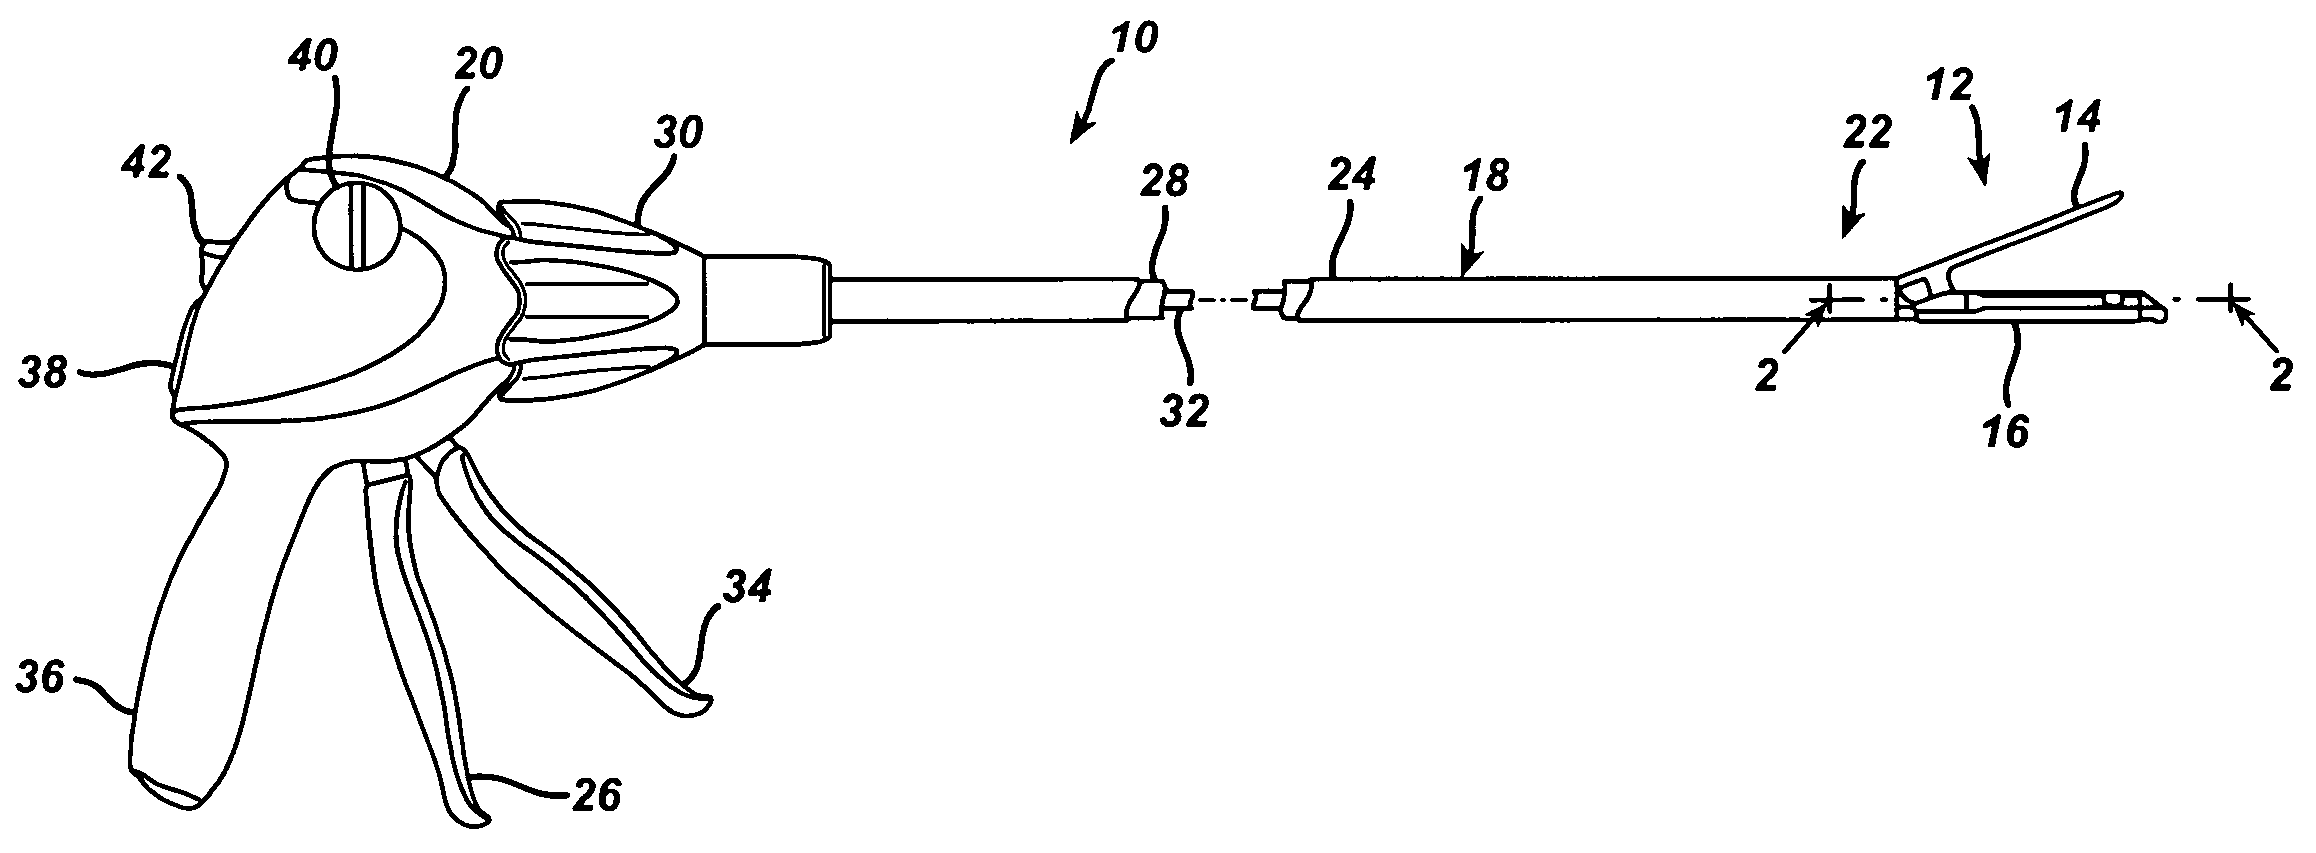 Surgical stapling instrument incorporating a multistroke firing position indicator and retraction mechanism